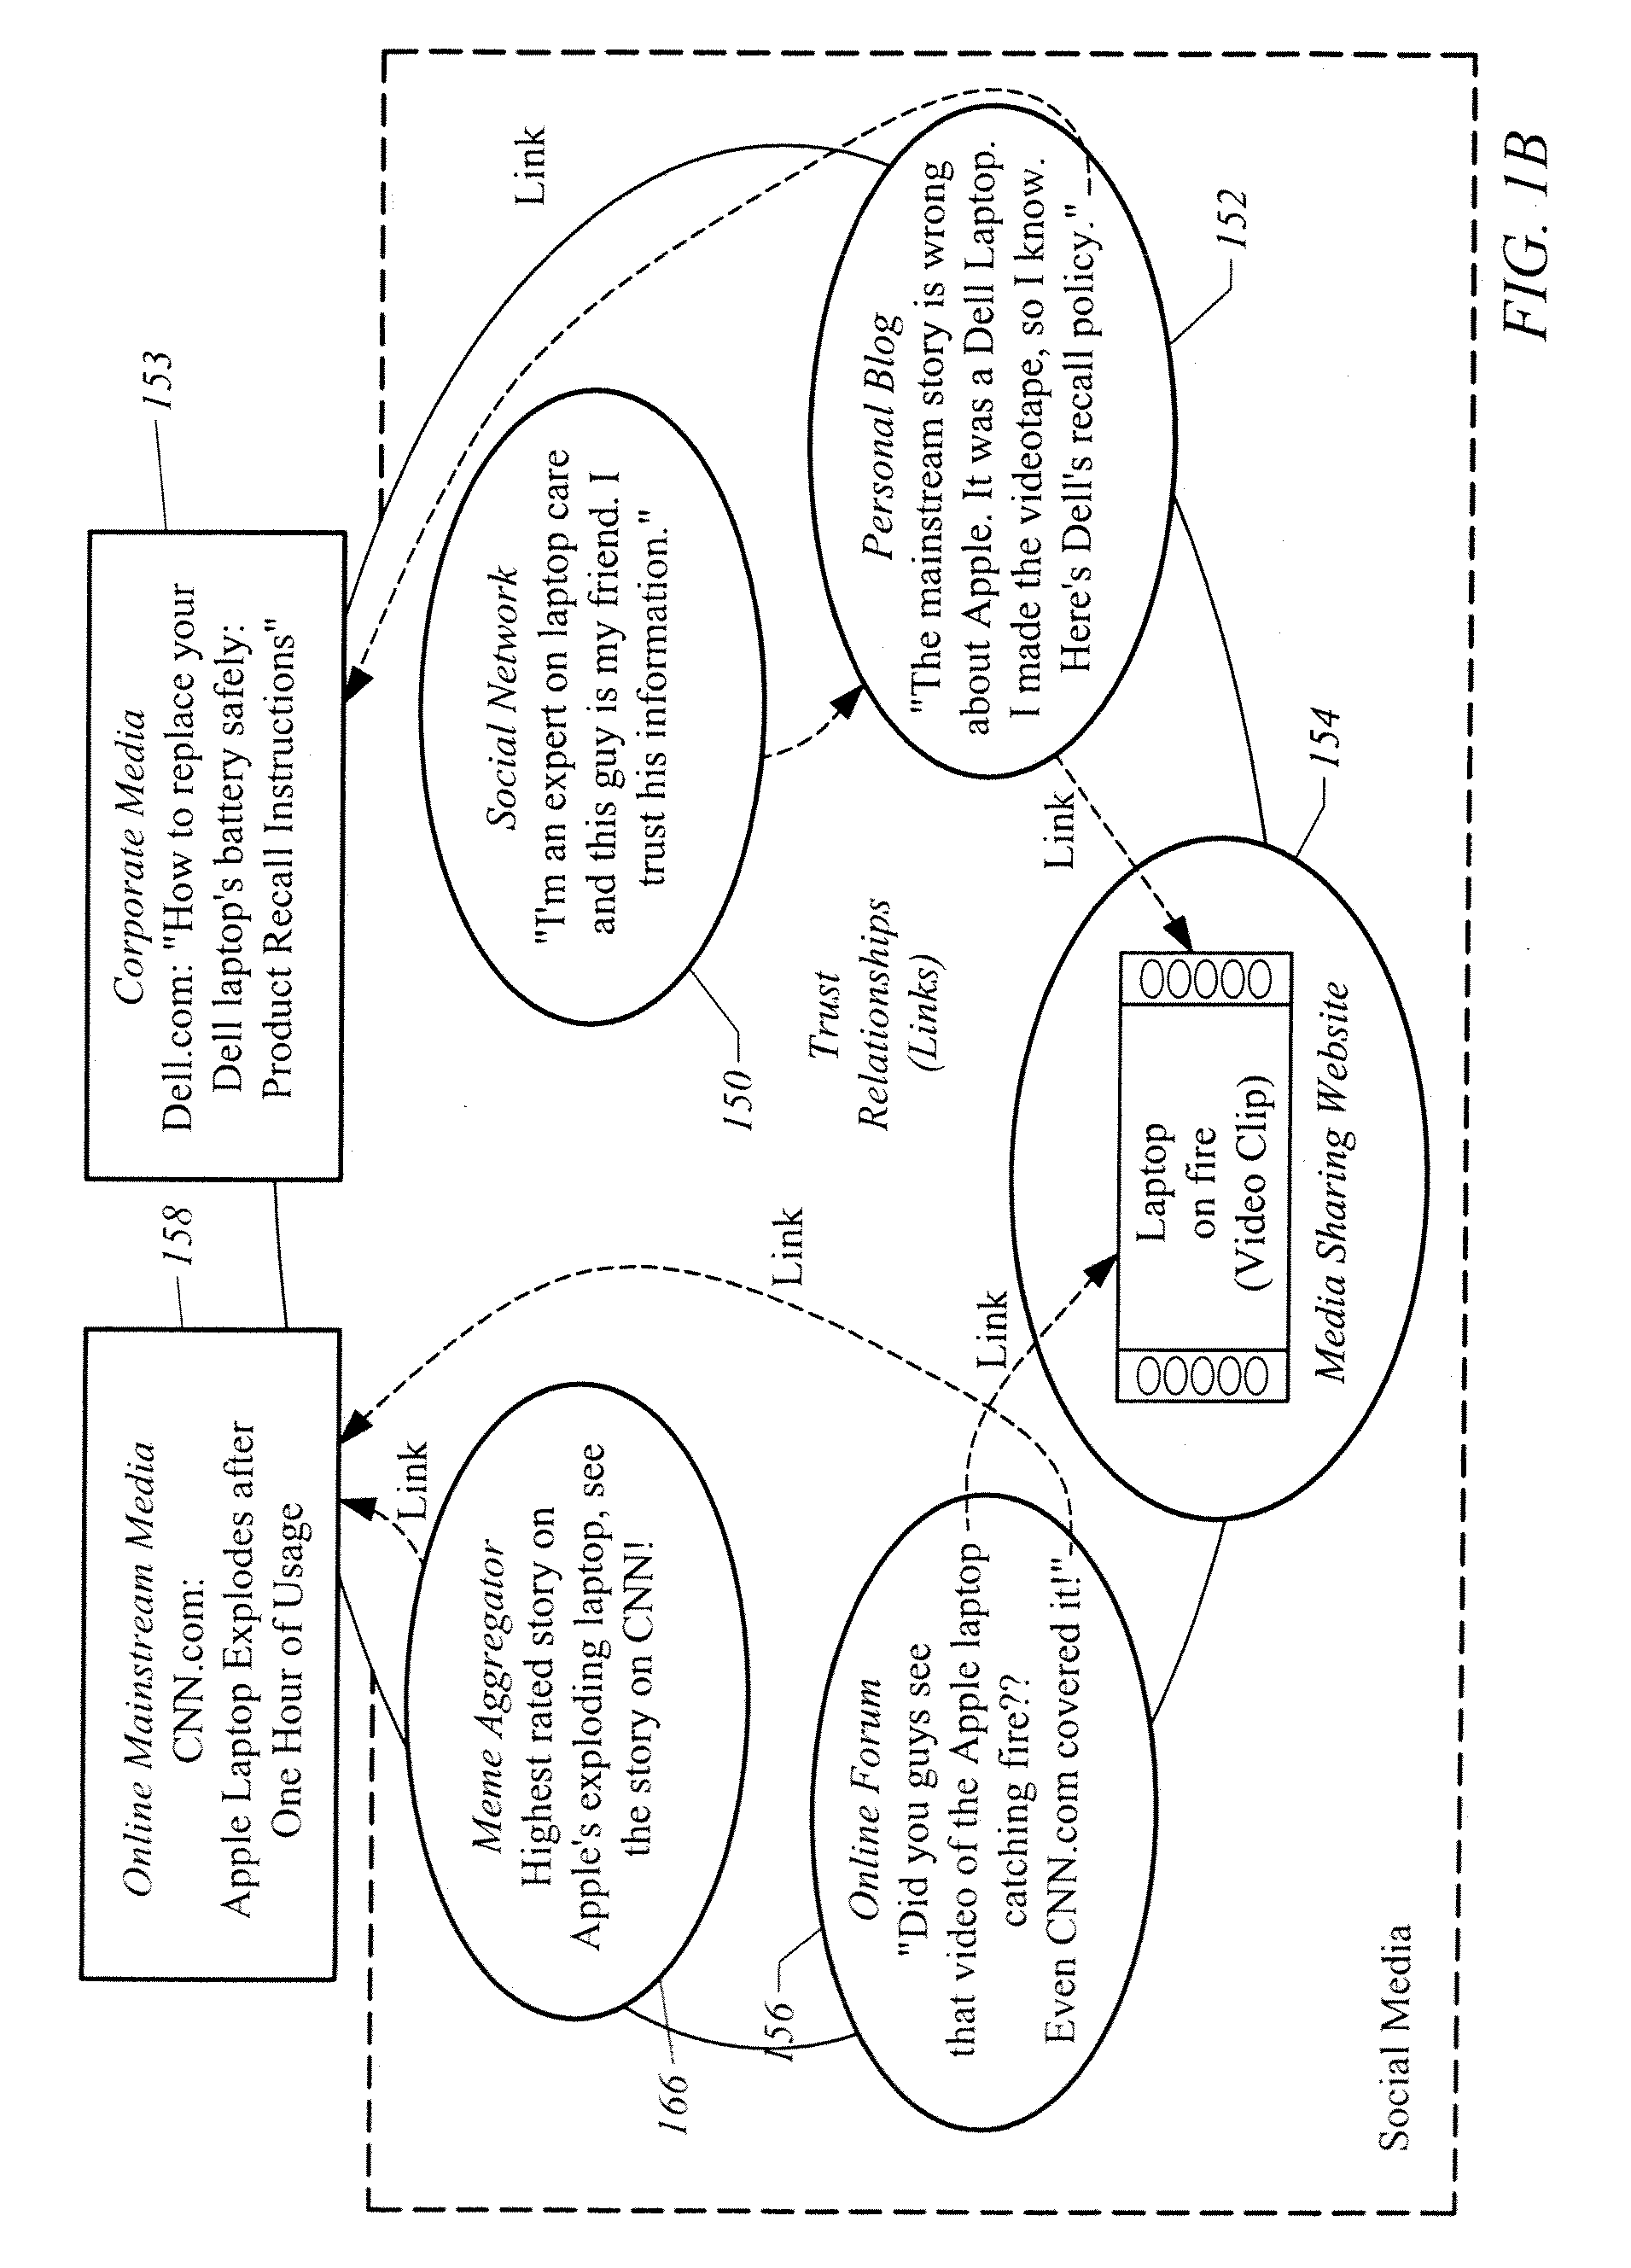 Social analytics system and method for analyzing conversations in social media